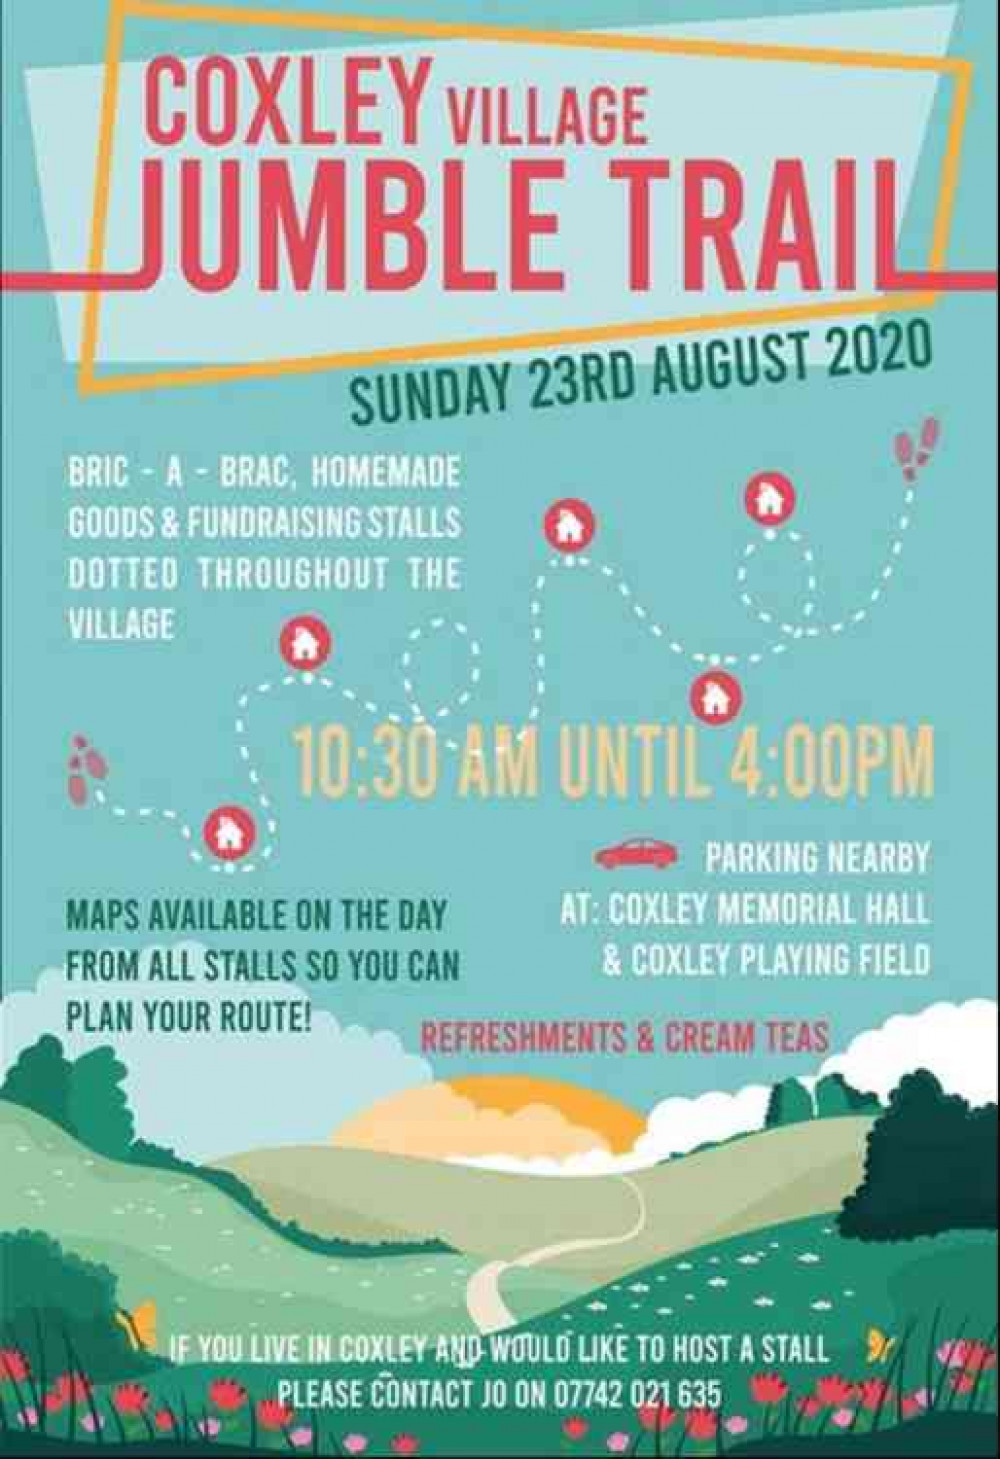 The jumble trail is taking place this weekend